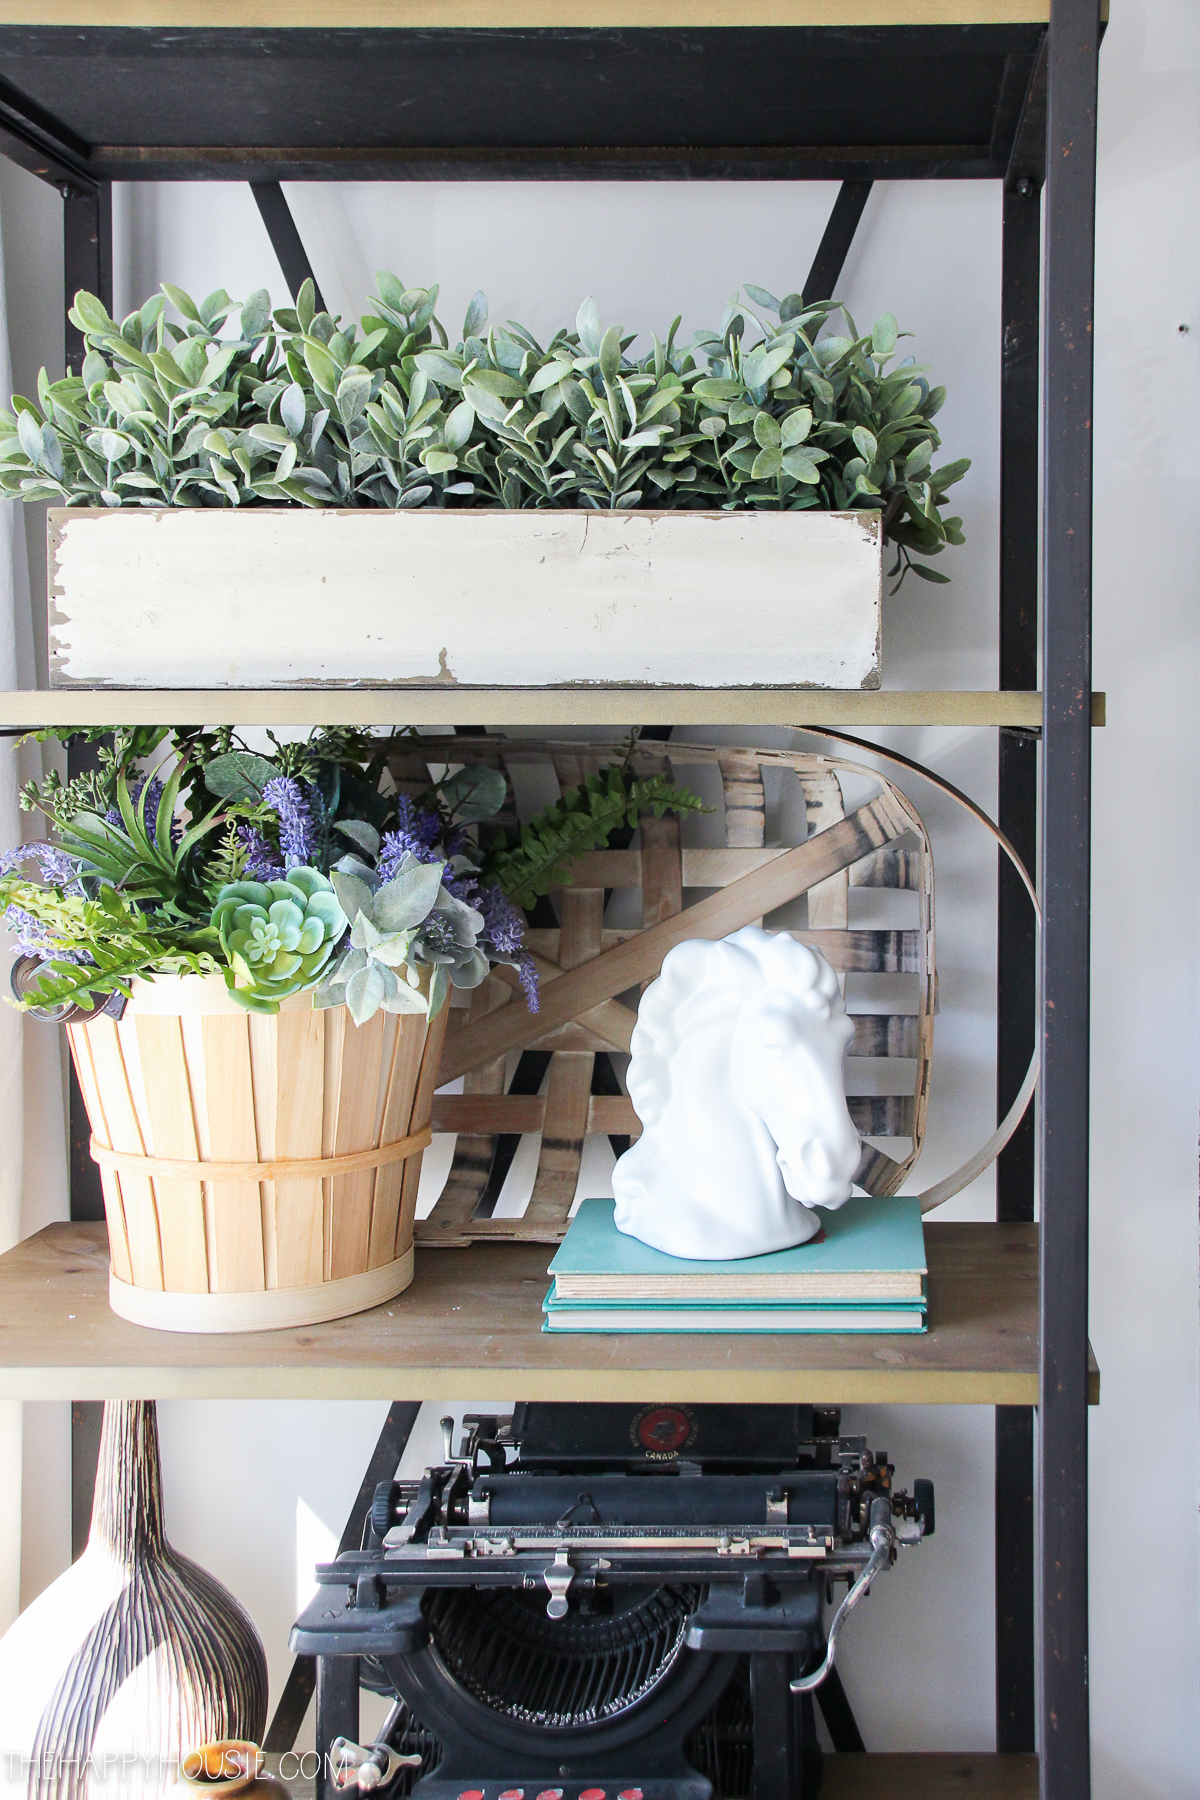 There is open shelving with plants and an antique typewriter on the shelves.